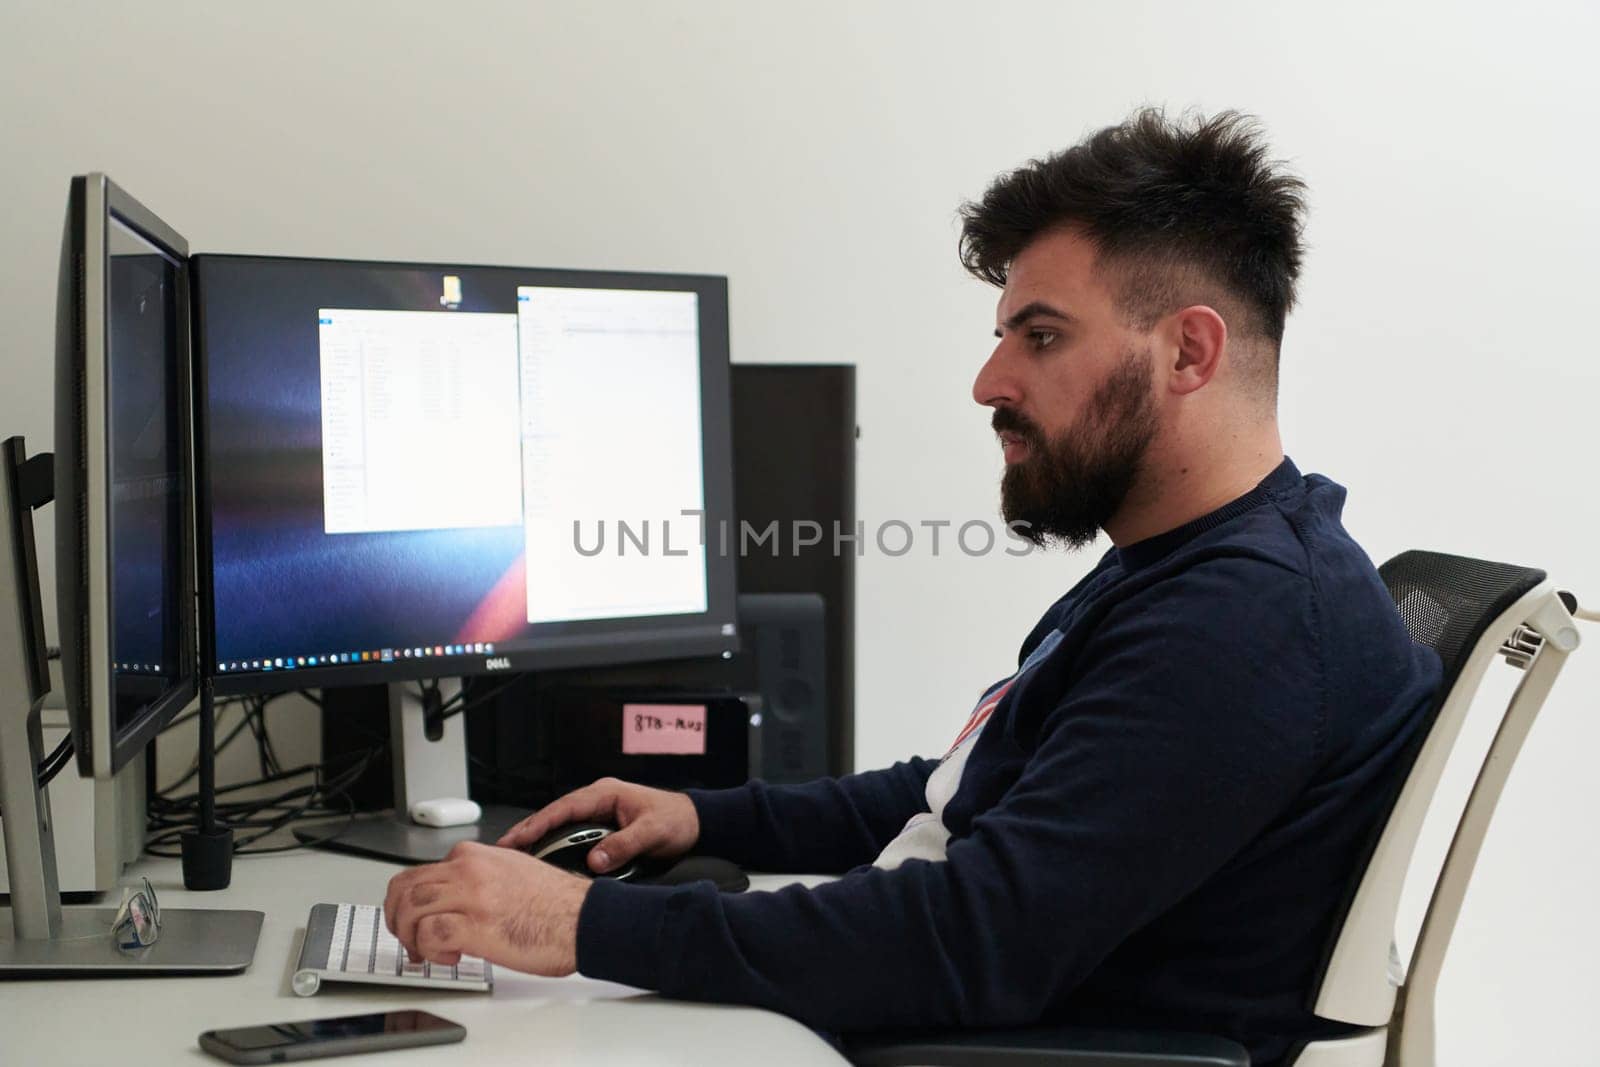 professional video editor enhancing digital footage using specialized software. Expert videographer in home office workspace editing on dual screen workstation computer desktop workplace